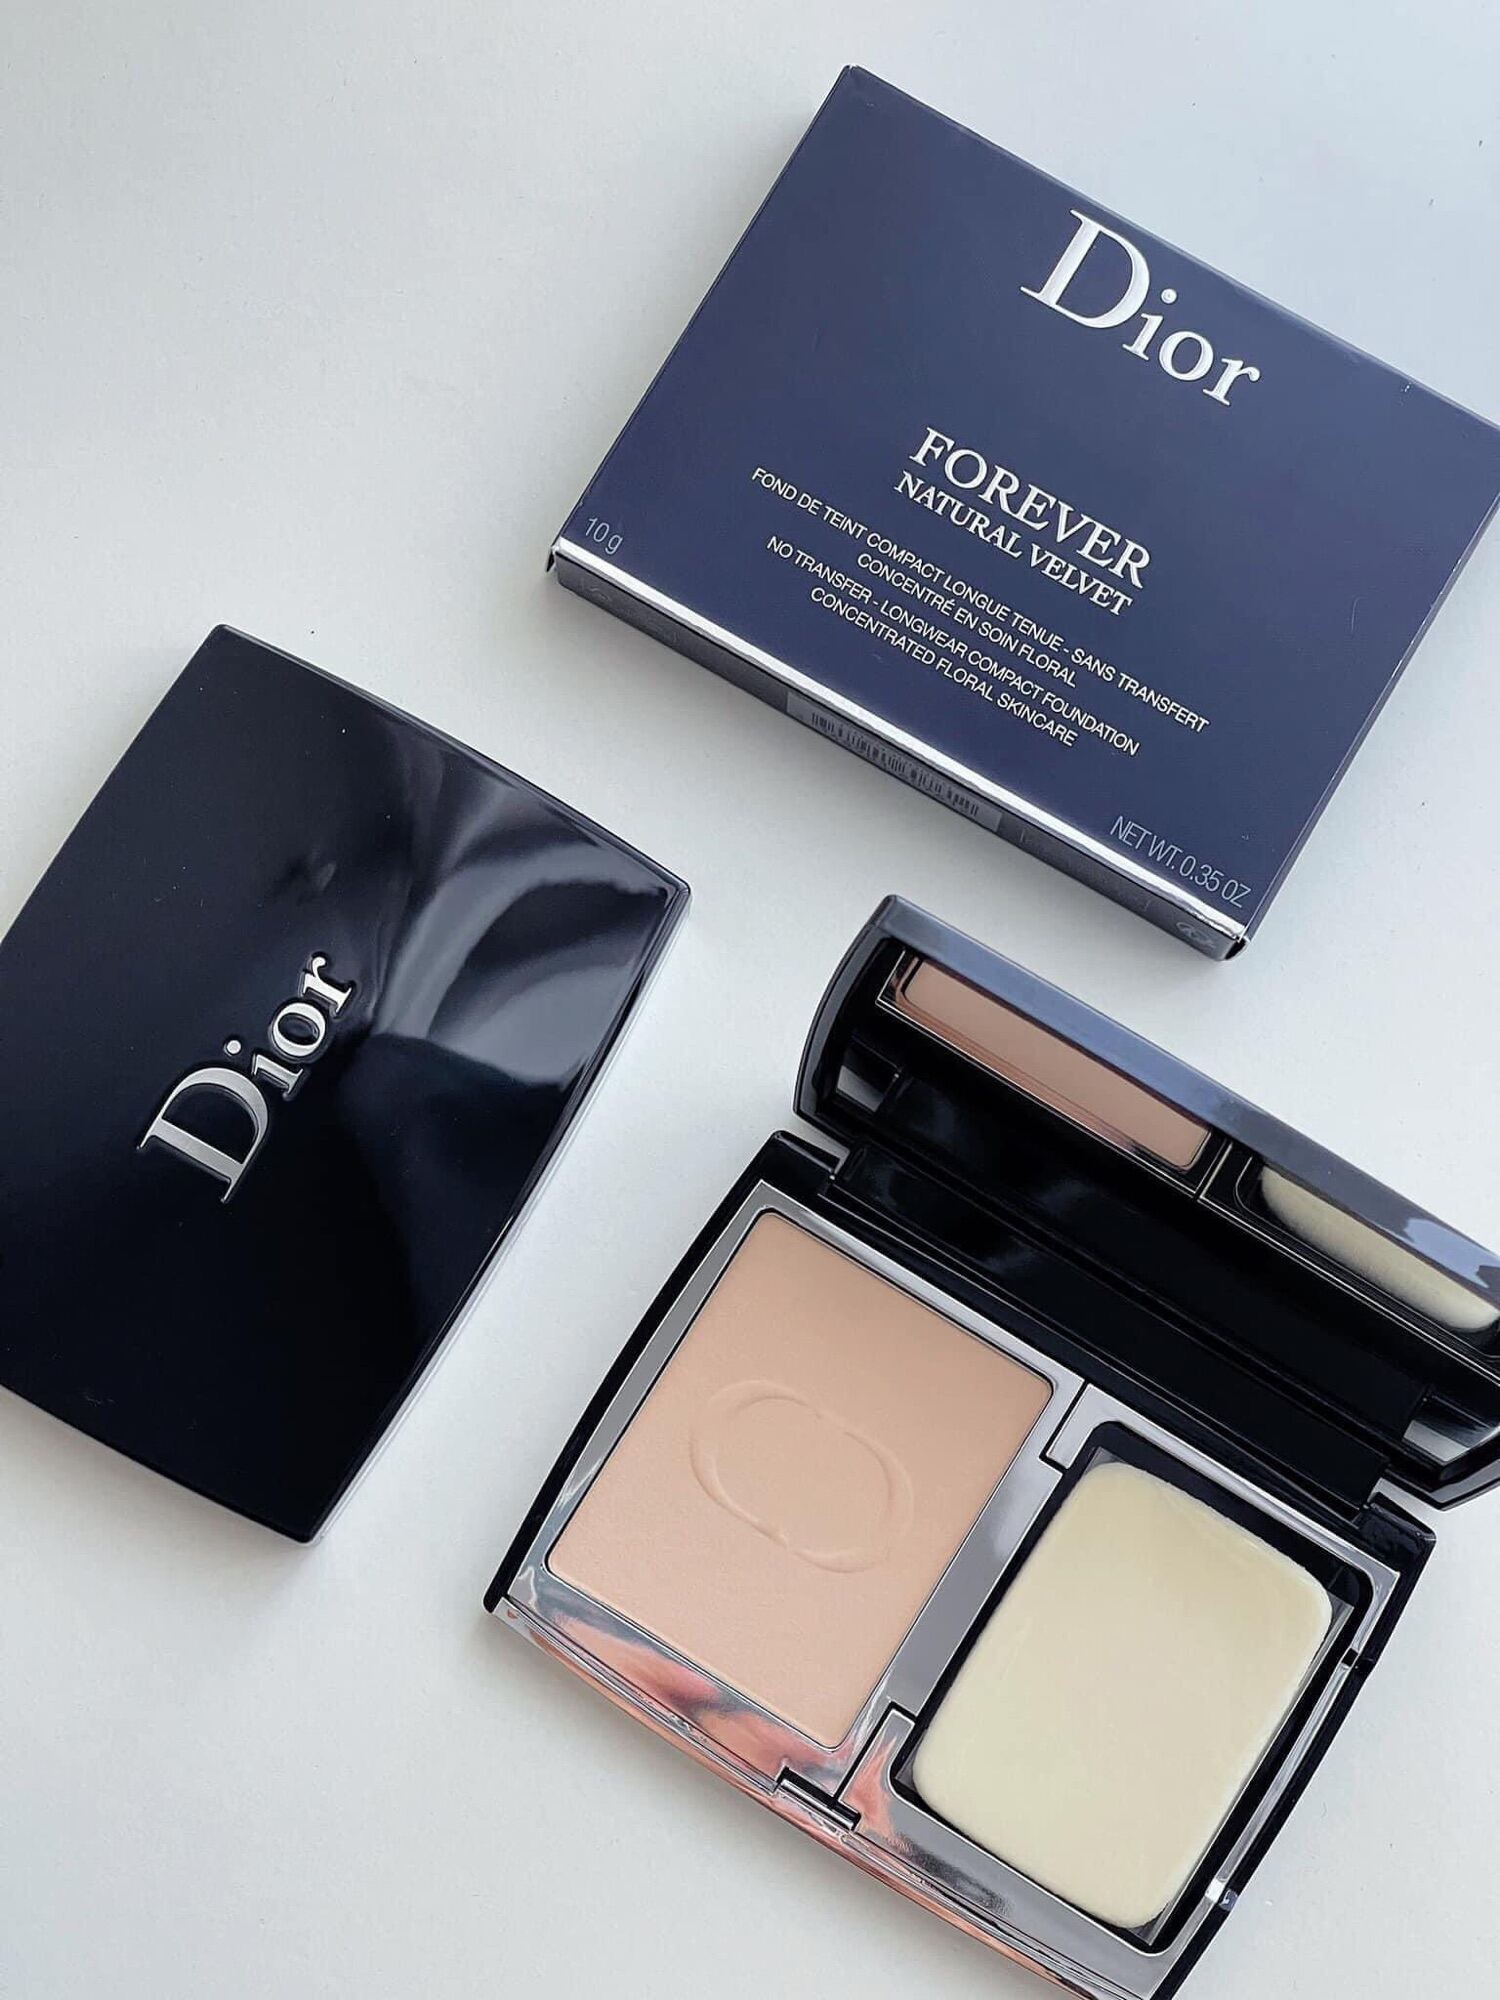 Phấn Phủ Dior Diorskin Forever Extreme 9g  CHIPCHIPAUTH